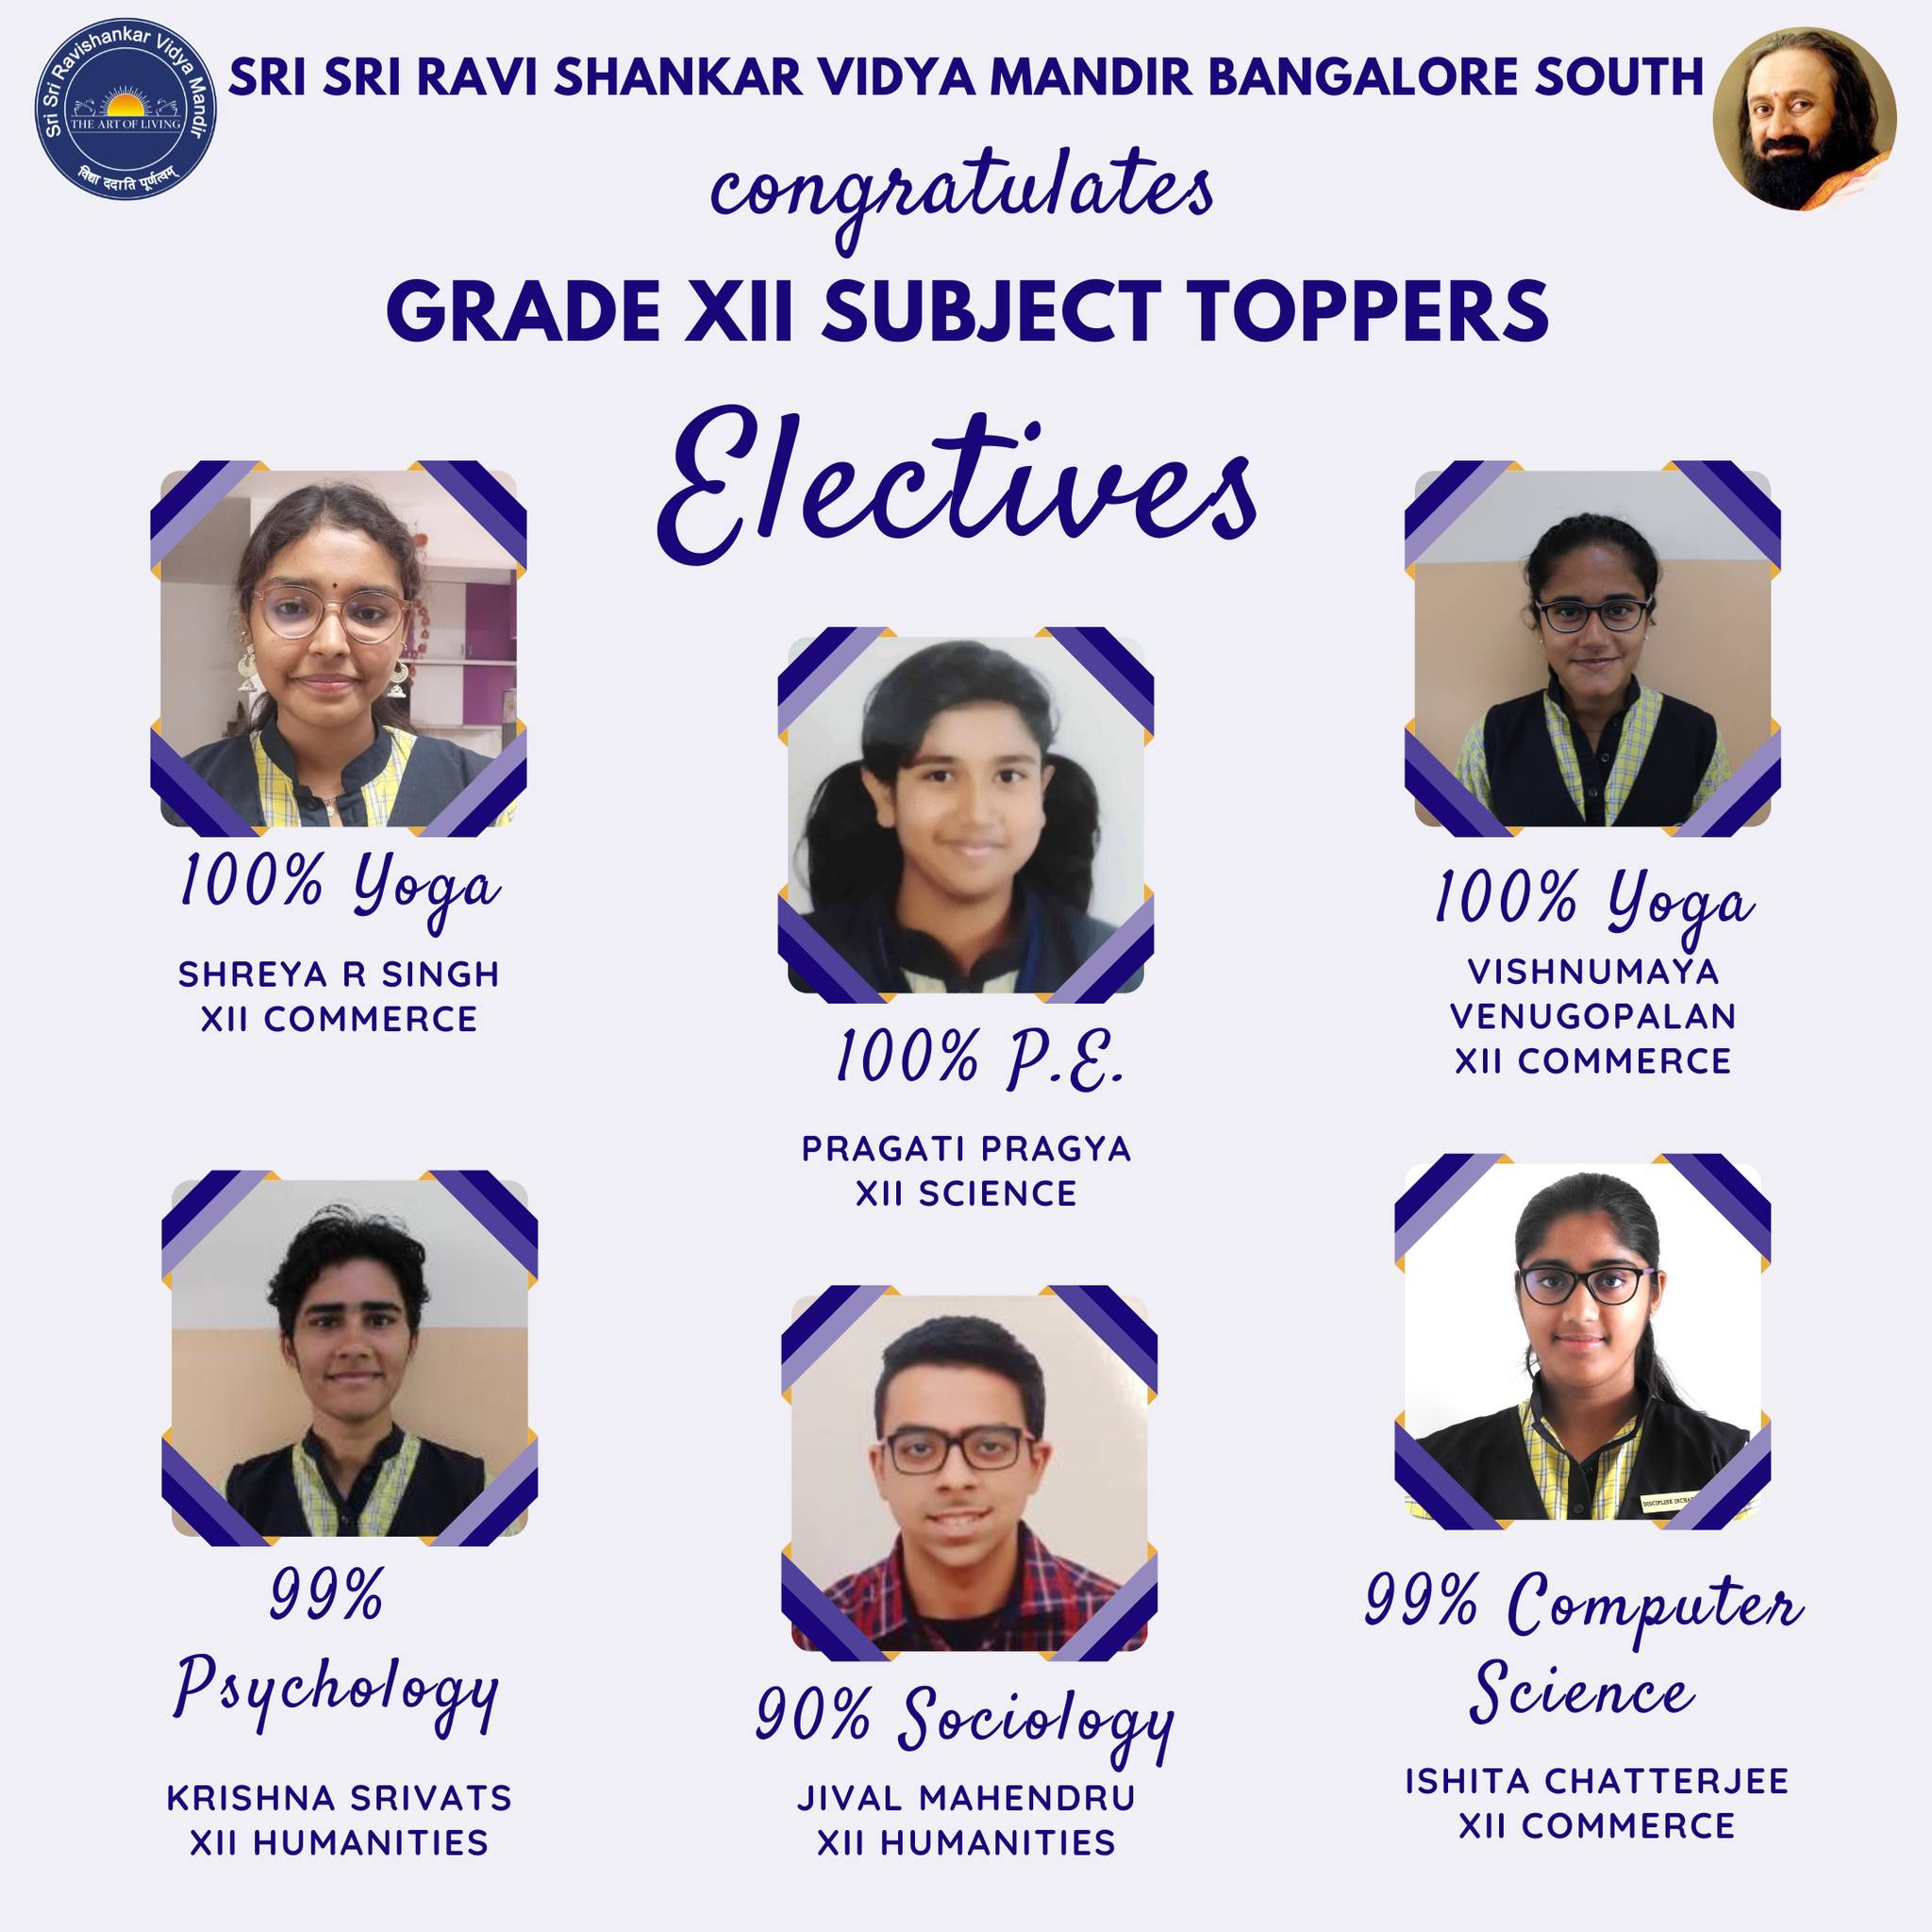 Grade XII Subject Toppers Electives